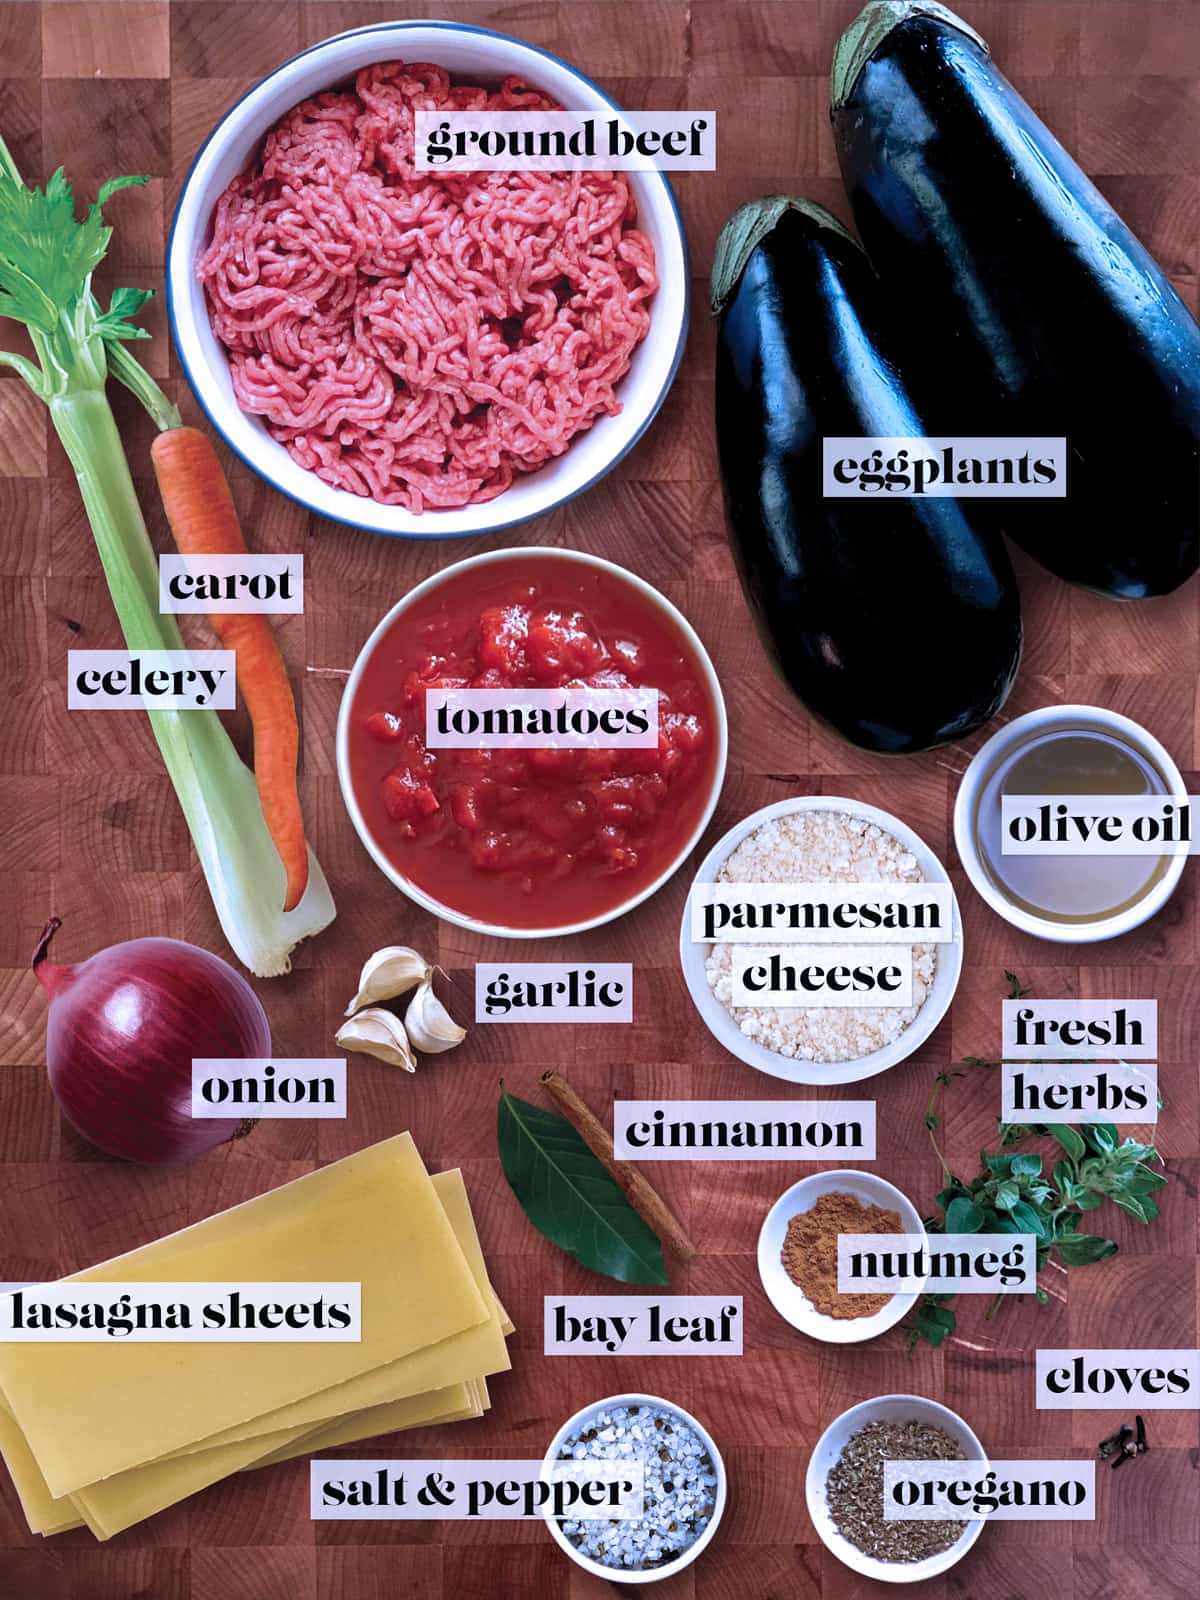 All the ingredients to make eggplant lasagna. Ingredients for béchamel are not shown.